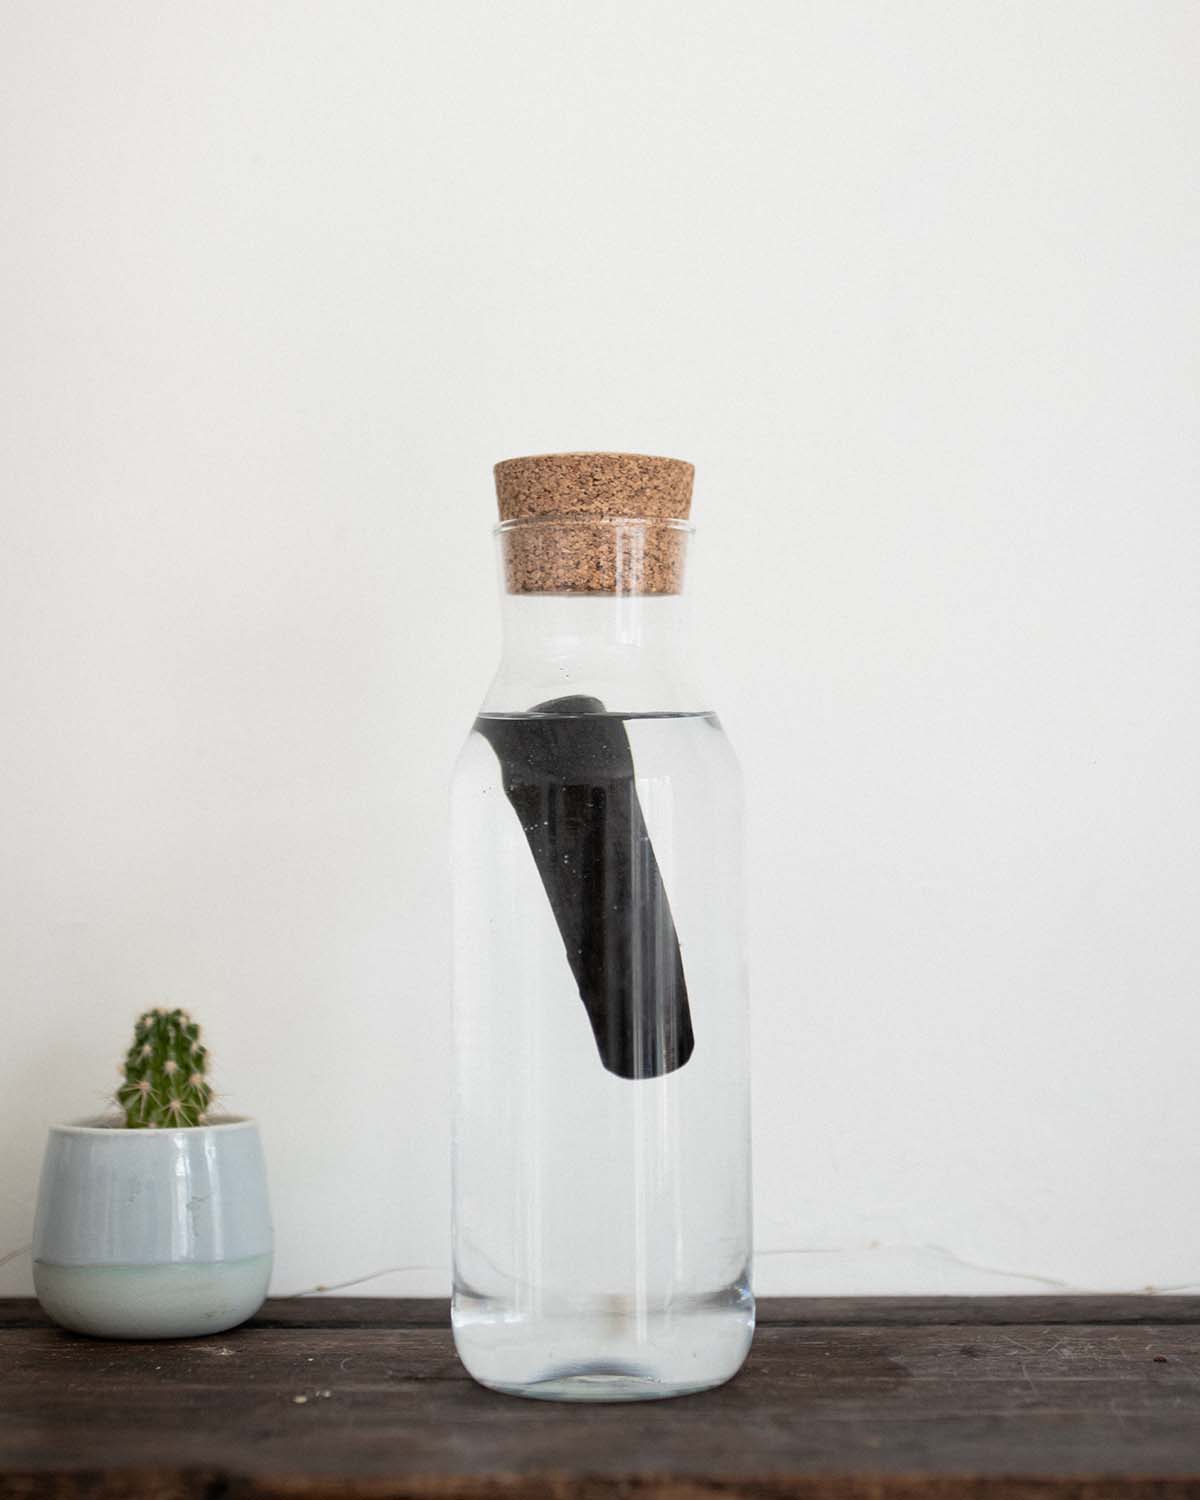 Water Filtration Systems: How to Get Clean Water at Home